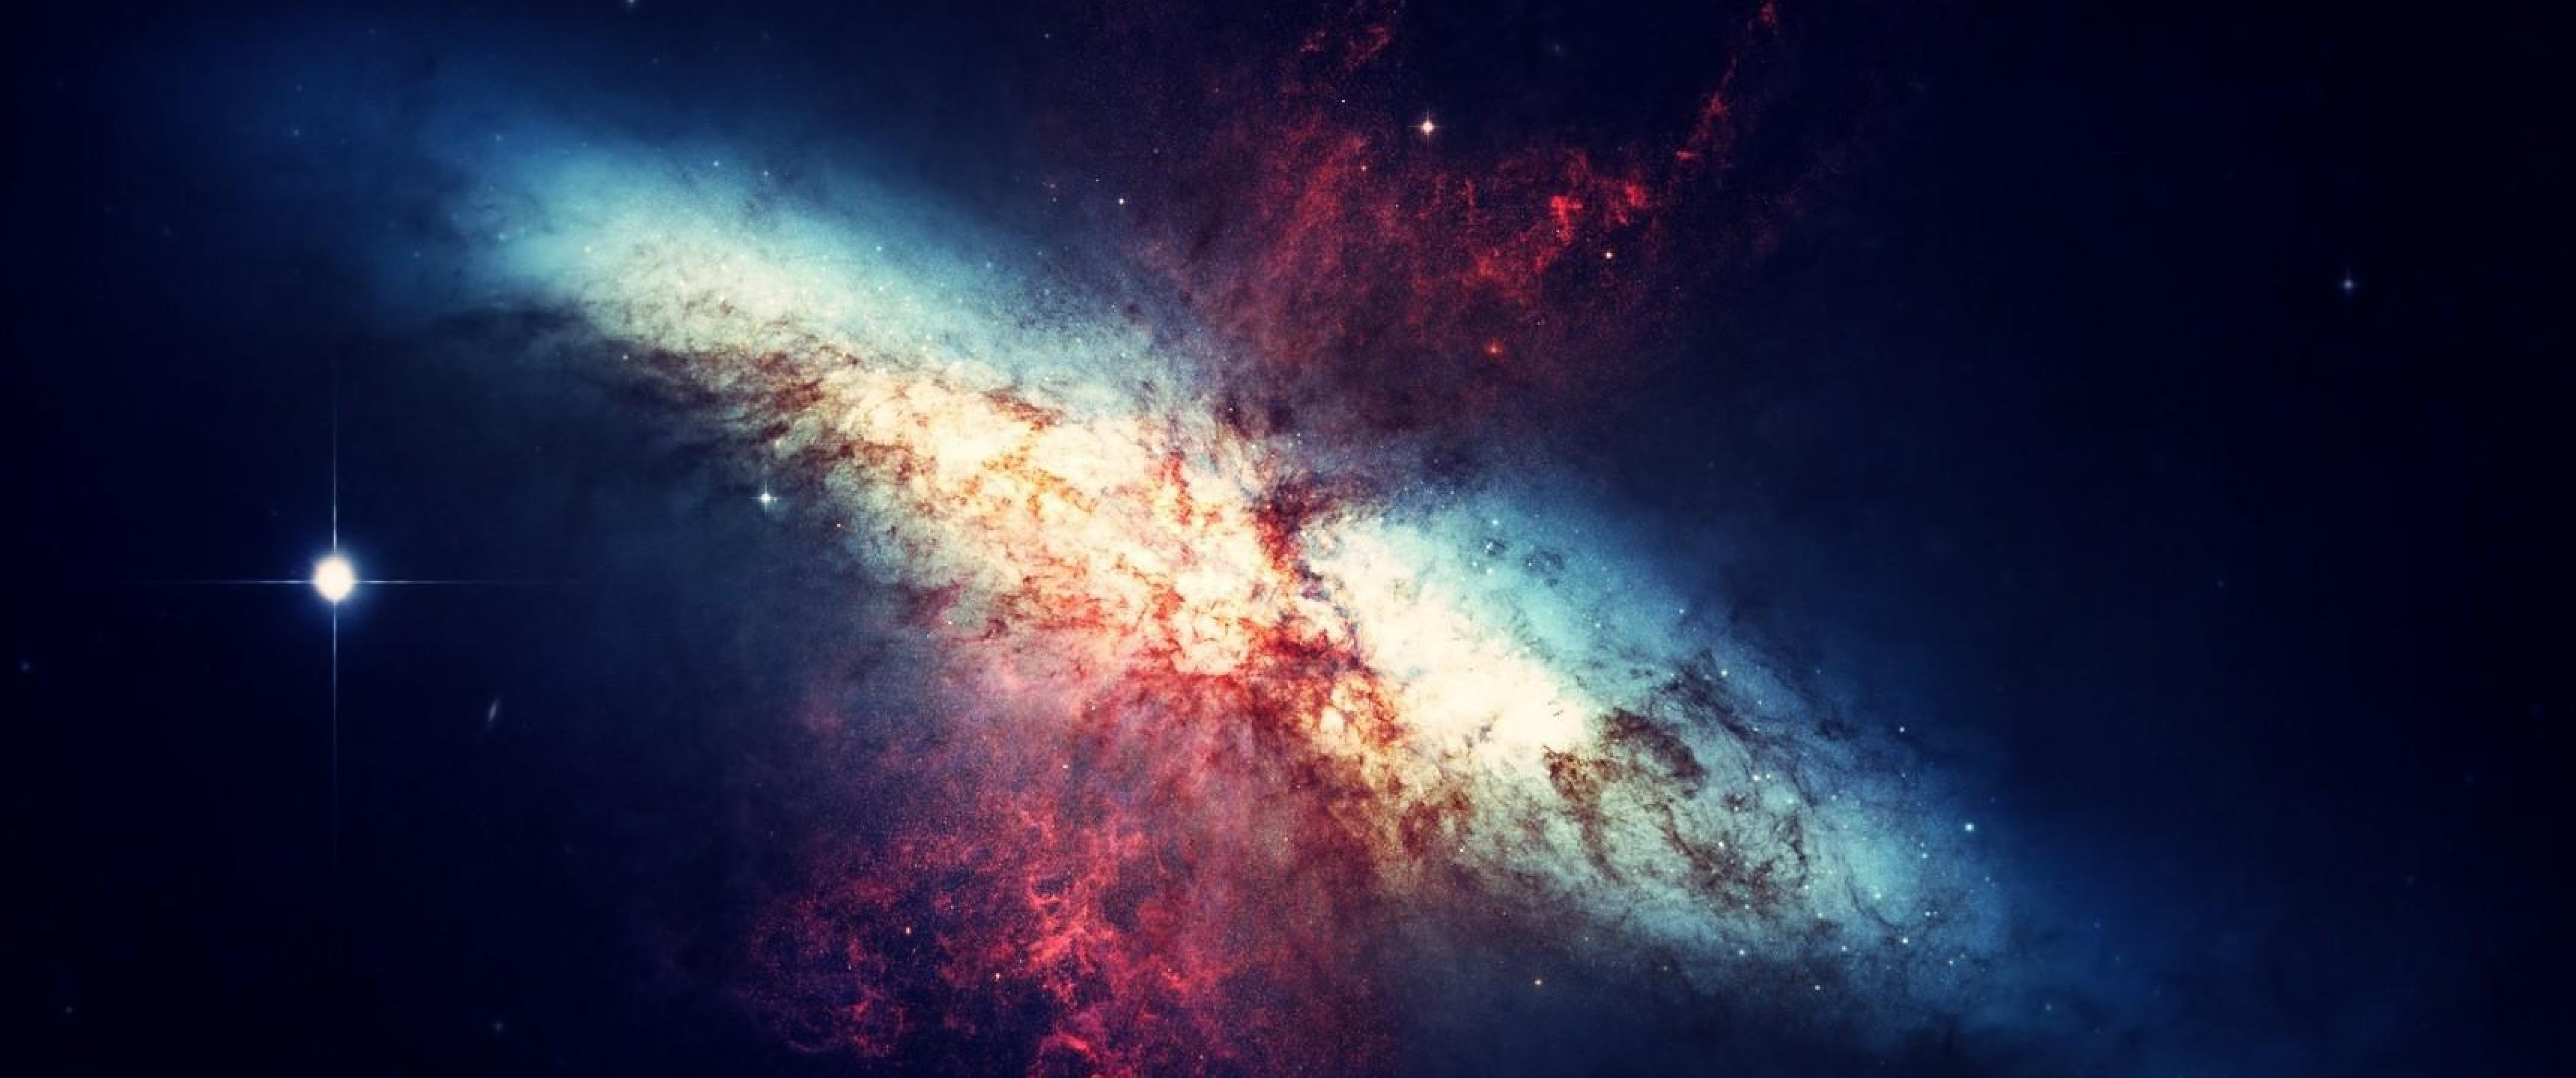 High Resolution Galaxy Wallpaper (59+ images)